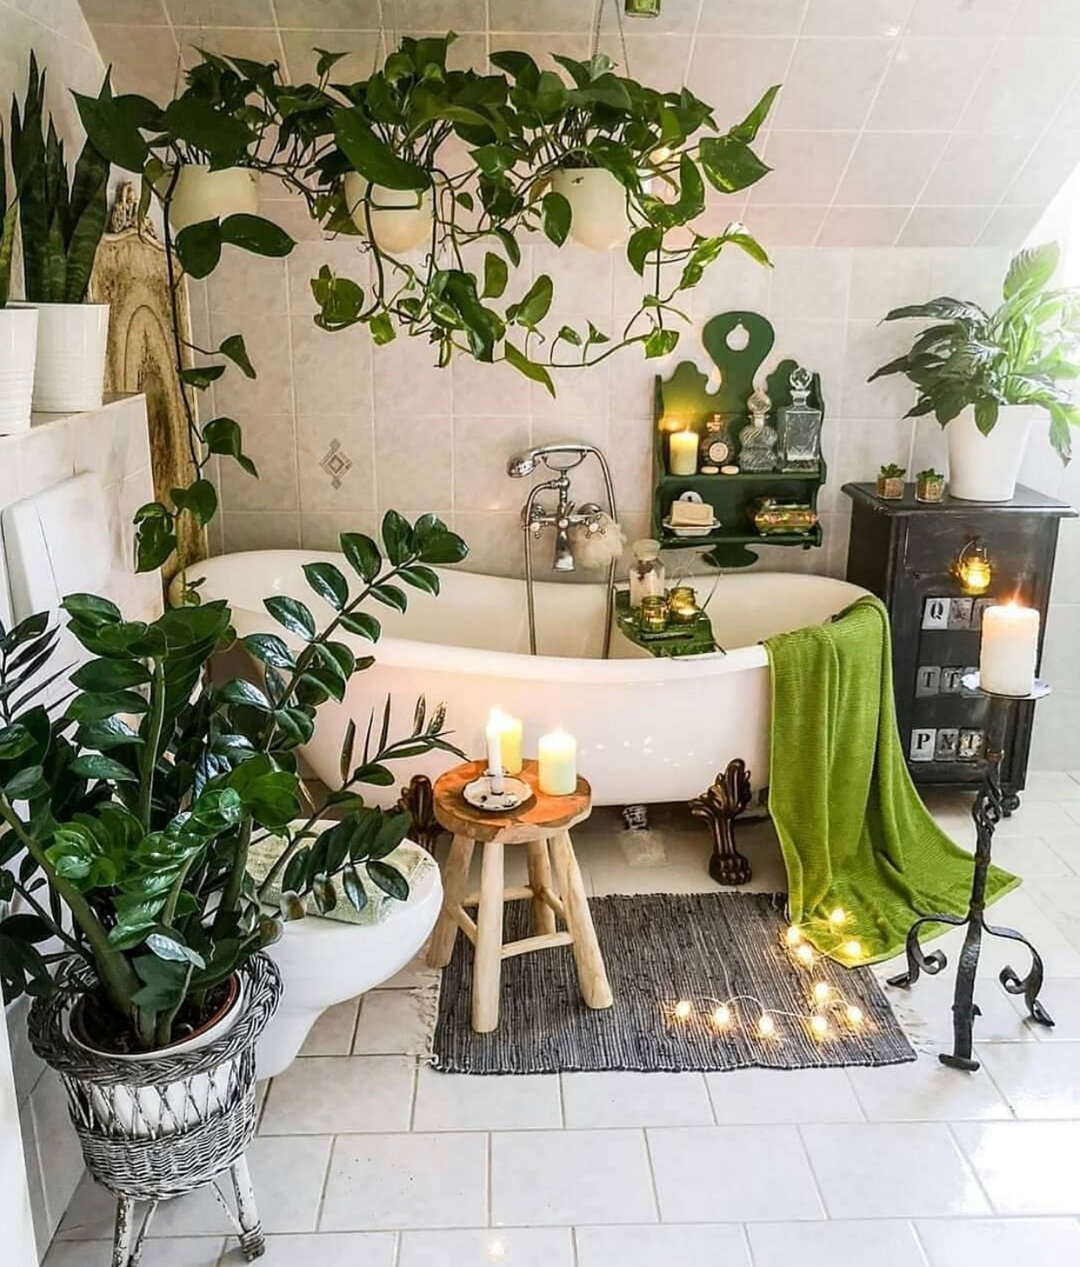 Goals! ​​​​​​​​
.​​​​​​​​
A total vibe and I'm so in love. ​​​​​​​​
.​​​​​​​​
#plantmom for life! ​​​​​​​​
.​​​​​​​​
.​​​​​​​​
.​​​​​​​​
.​​​​​​​​
 #plantlife  #doctorgreenthumb #herbalhealing #life #bloom #homeopathic #motherearth #naturesmedicine #